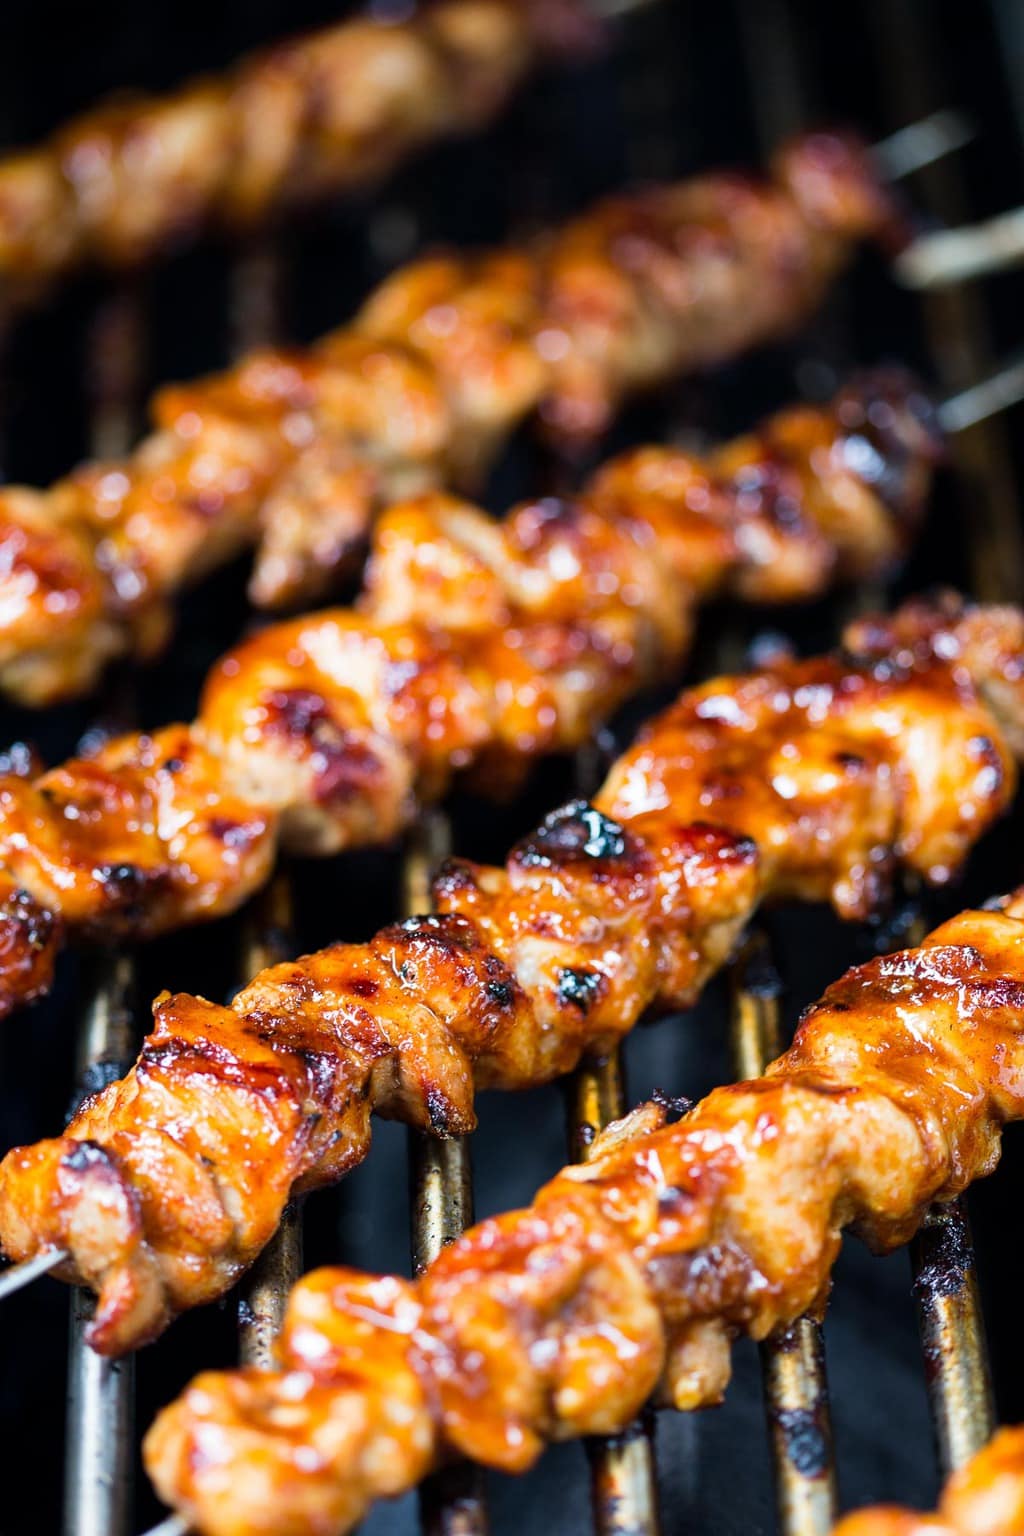 Vertical closeup grille photo of Peruvian Grilled Chicken Skewers being cooked on an outdoor grille.